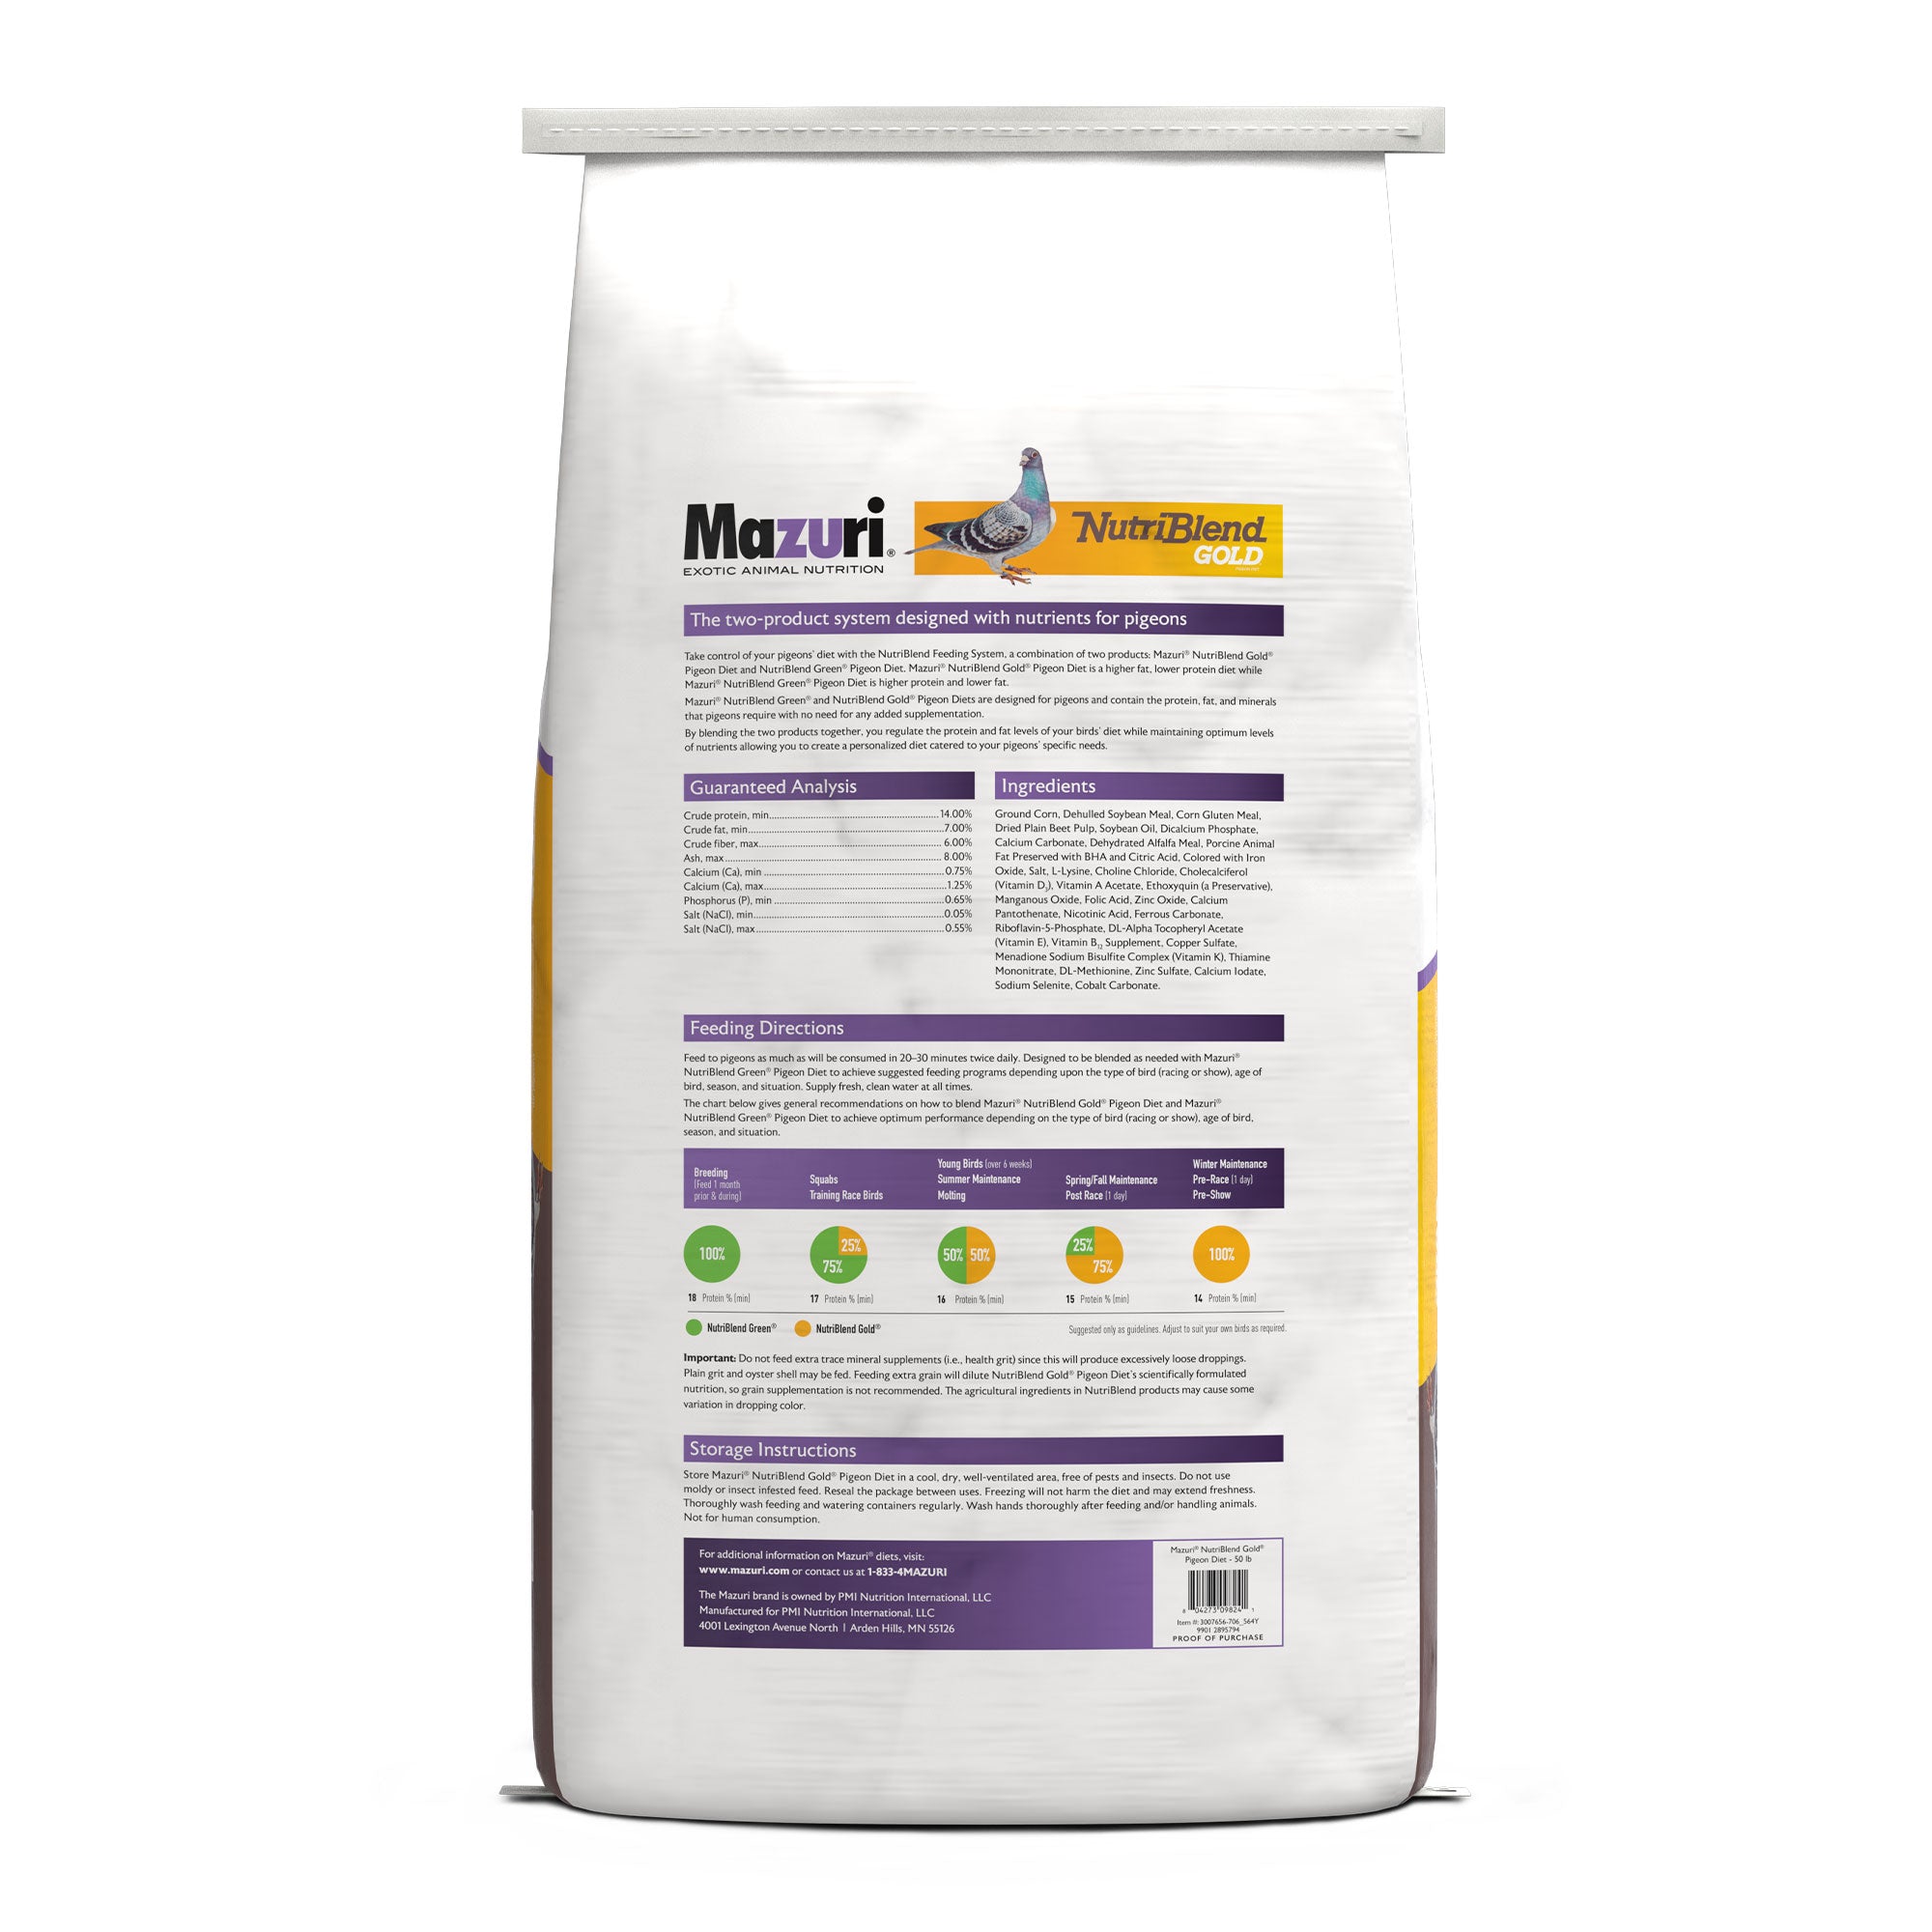 Mazuri NutriBlend Pigeon gold and brown bag back with guaranteed analysis, ingredients and feeding directions.